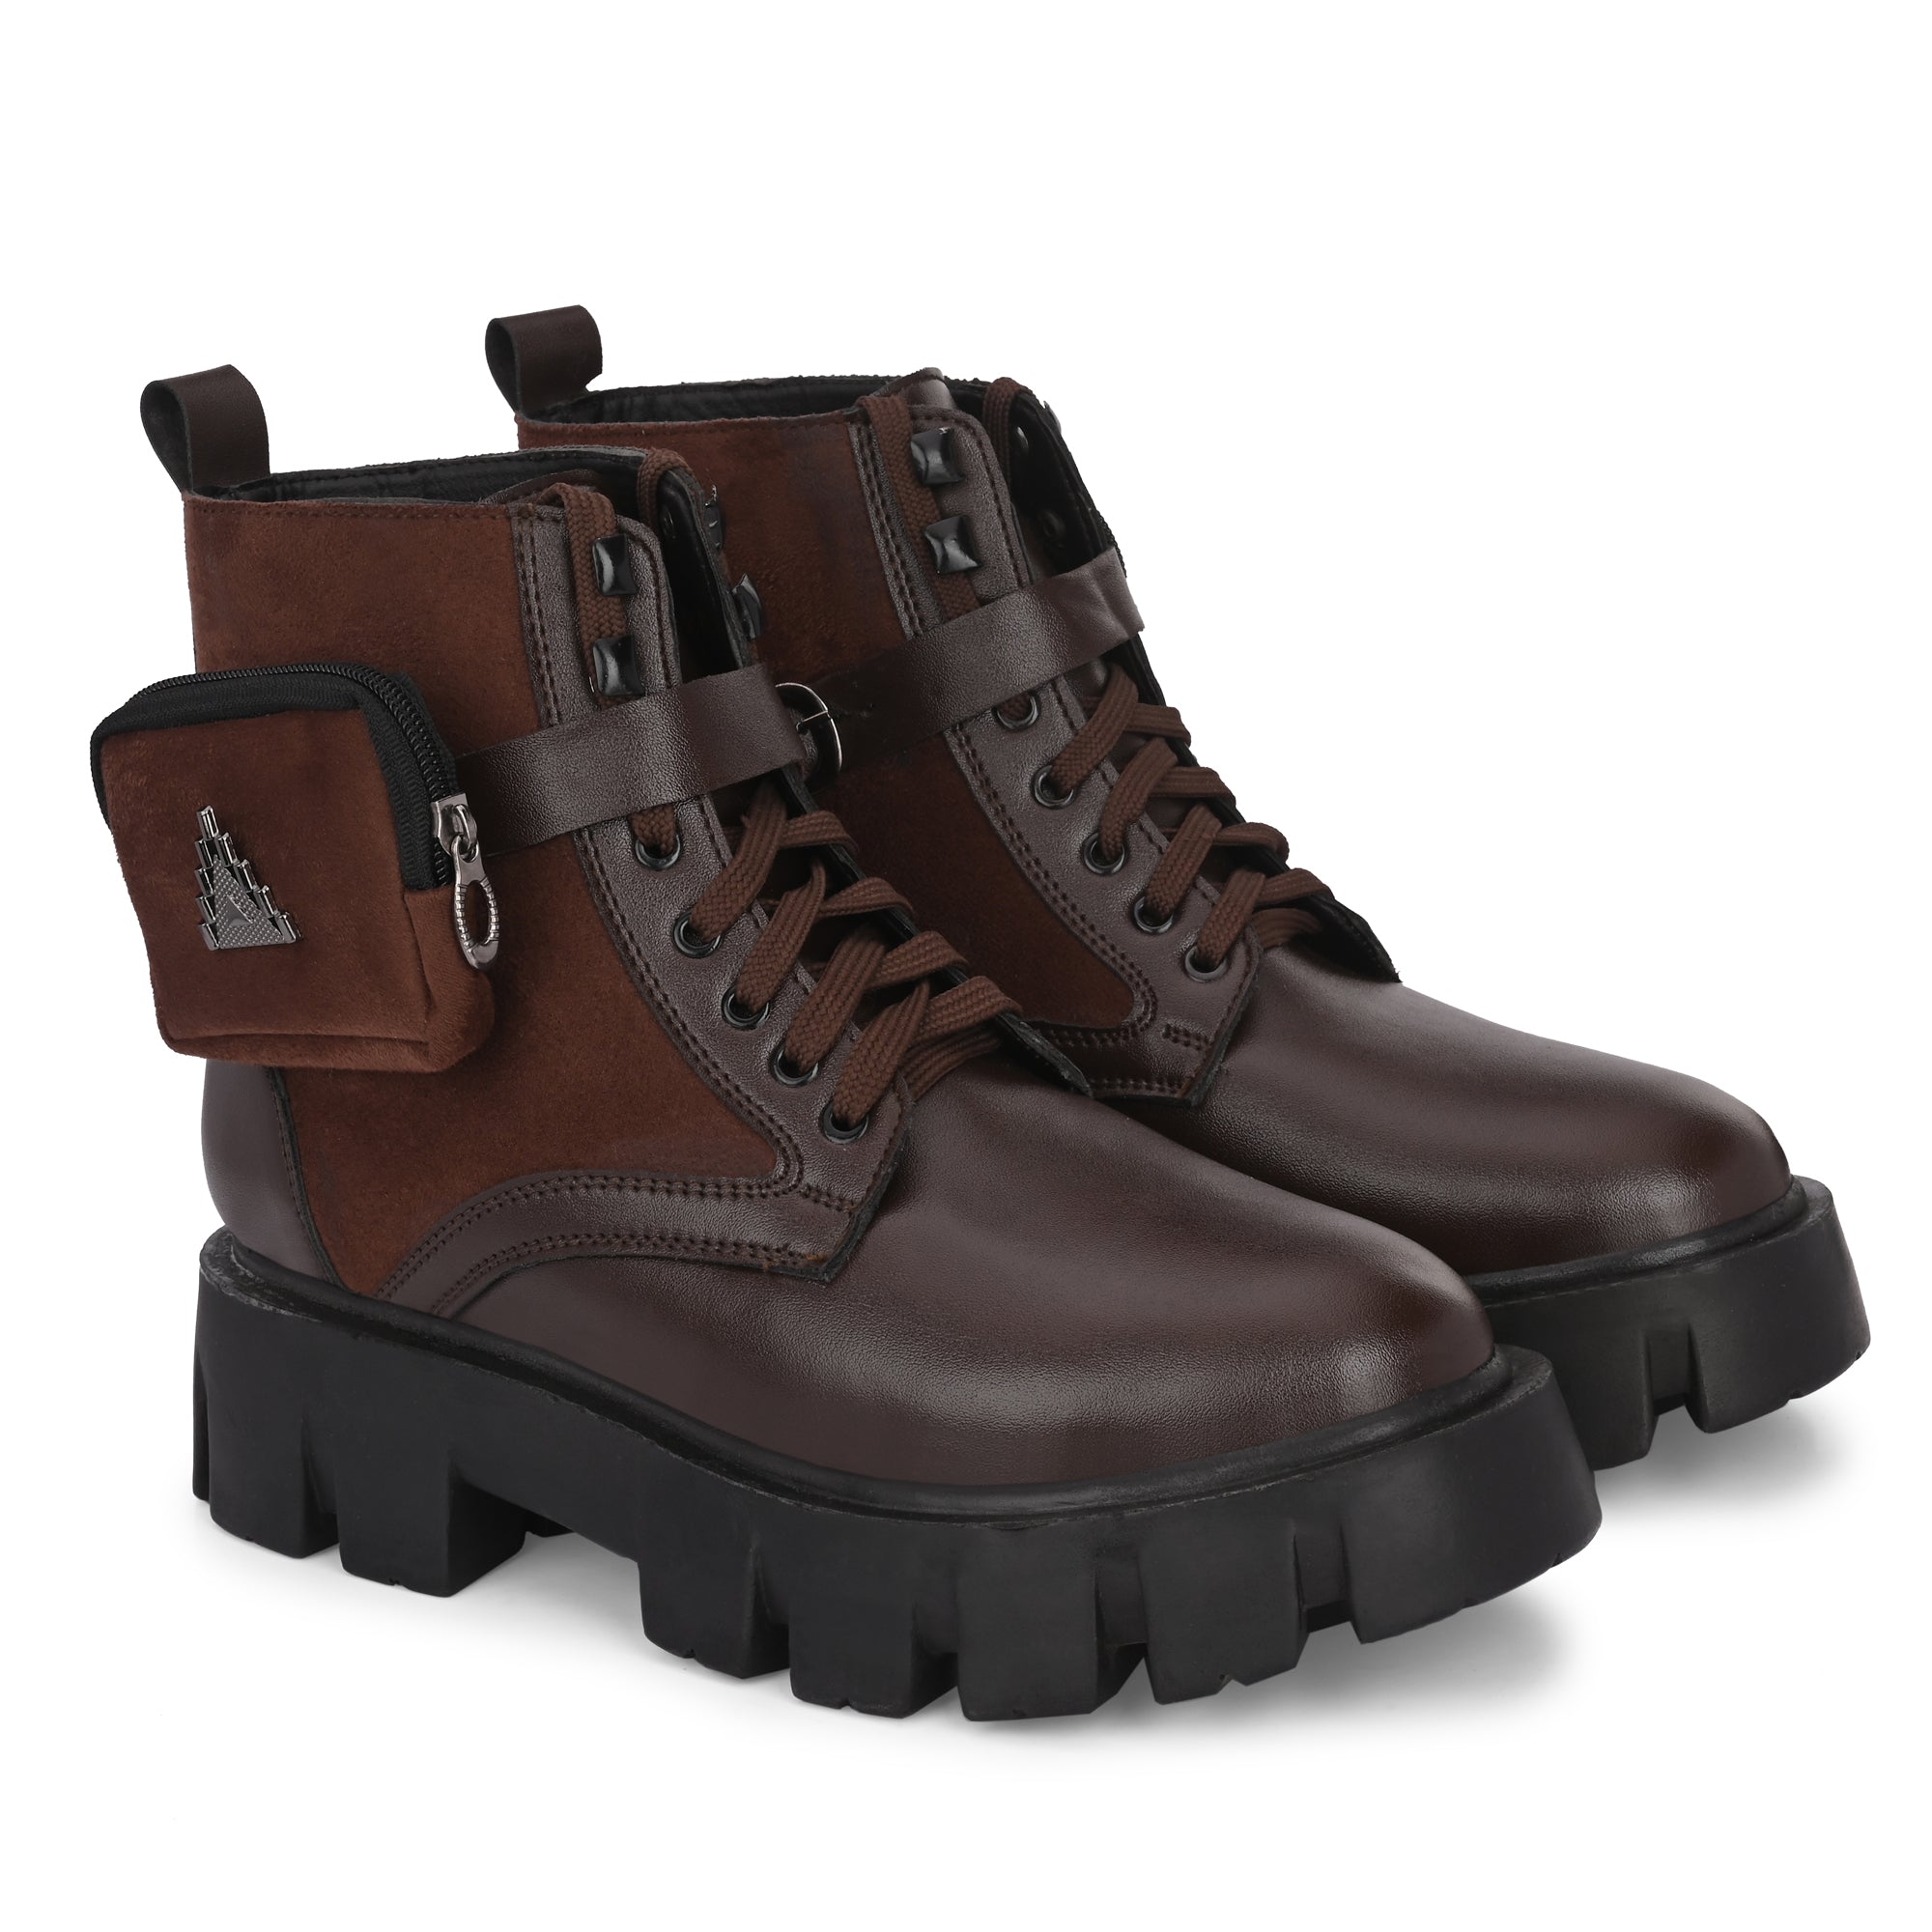 attitudist-coffee-brown-stylish-side-pocket-ankle-boots-for-men